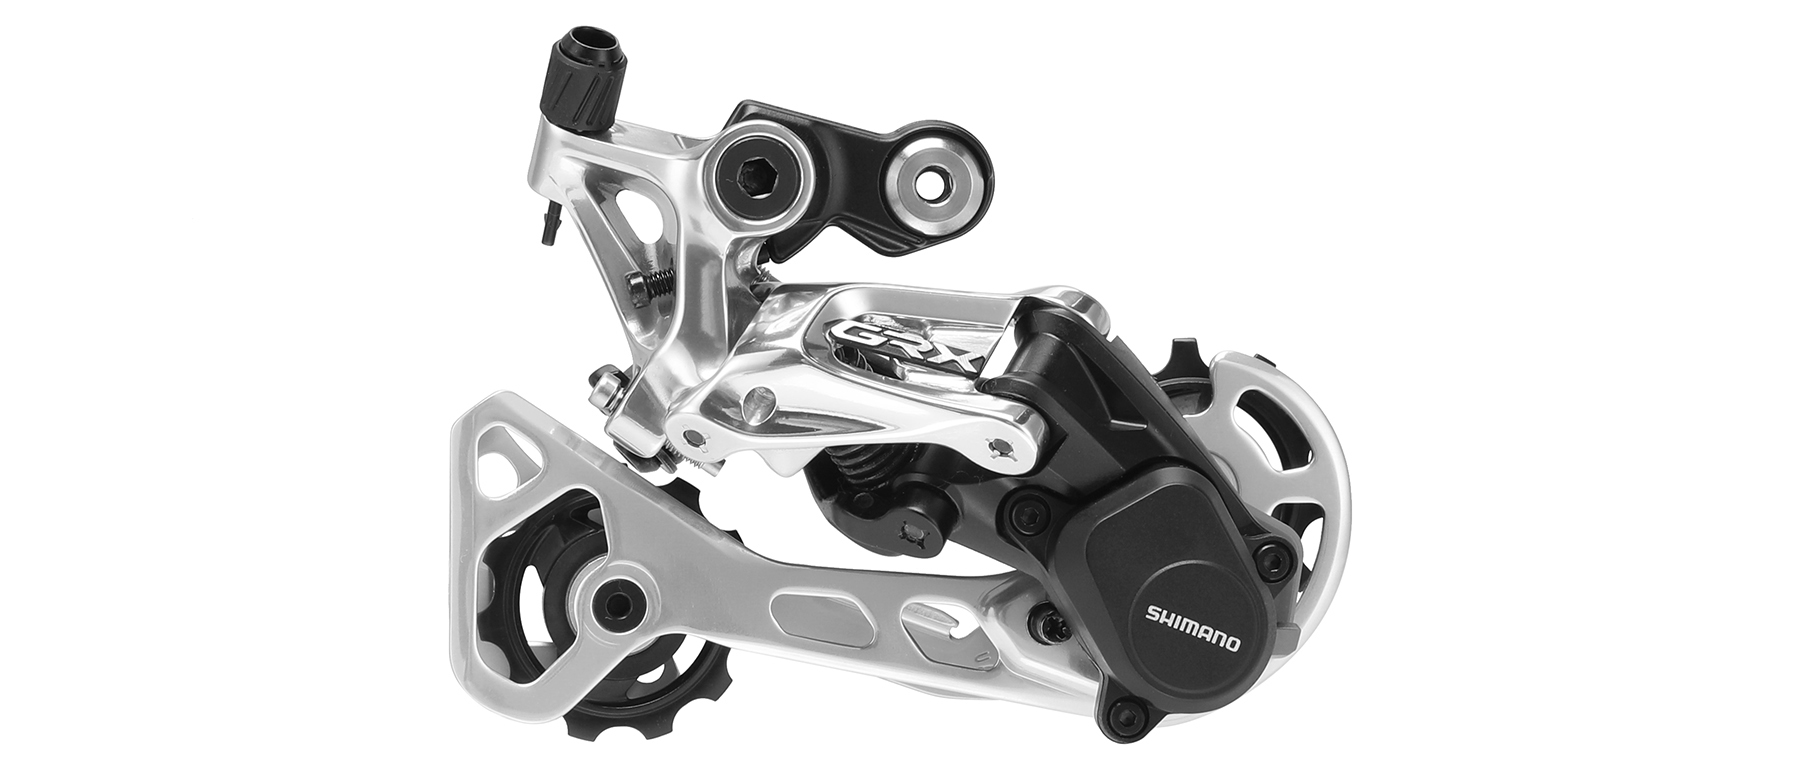 Shimano GRX Limited Edition 1x Group